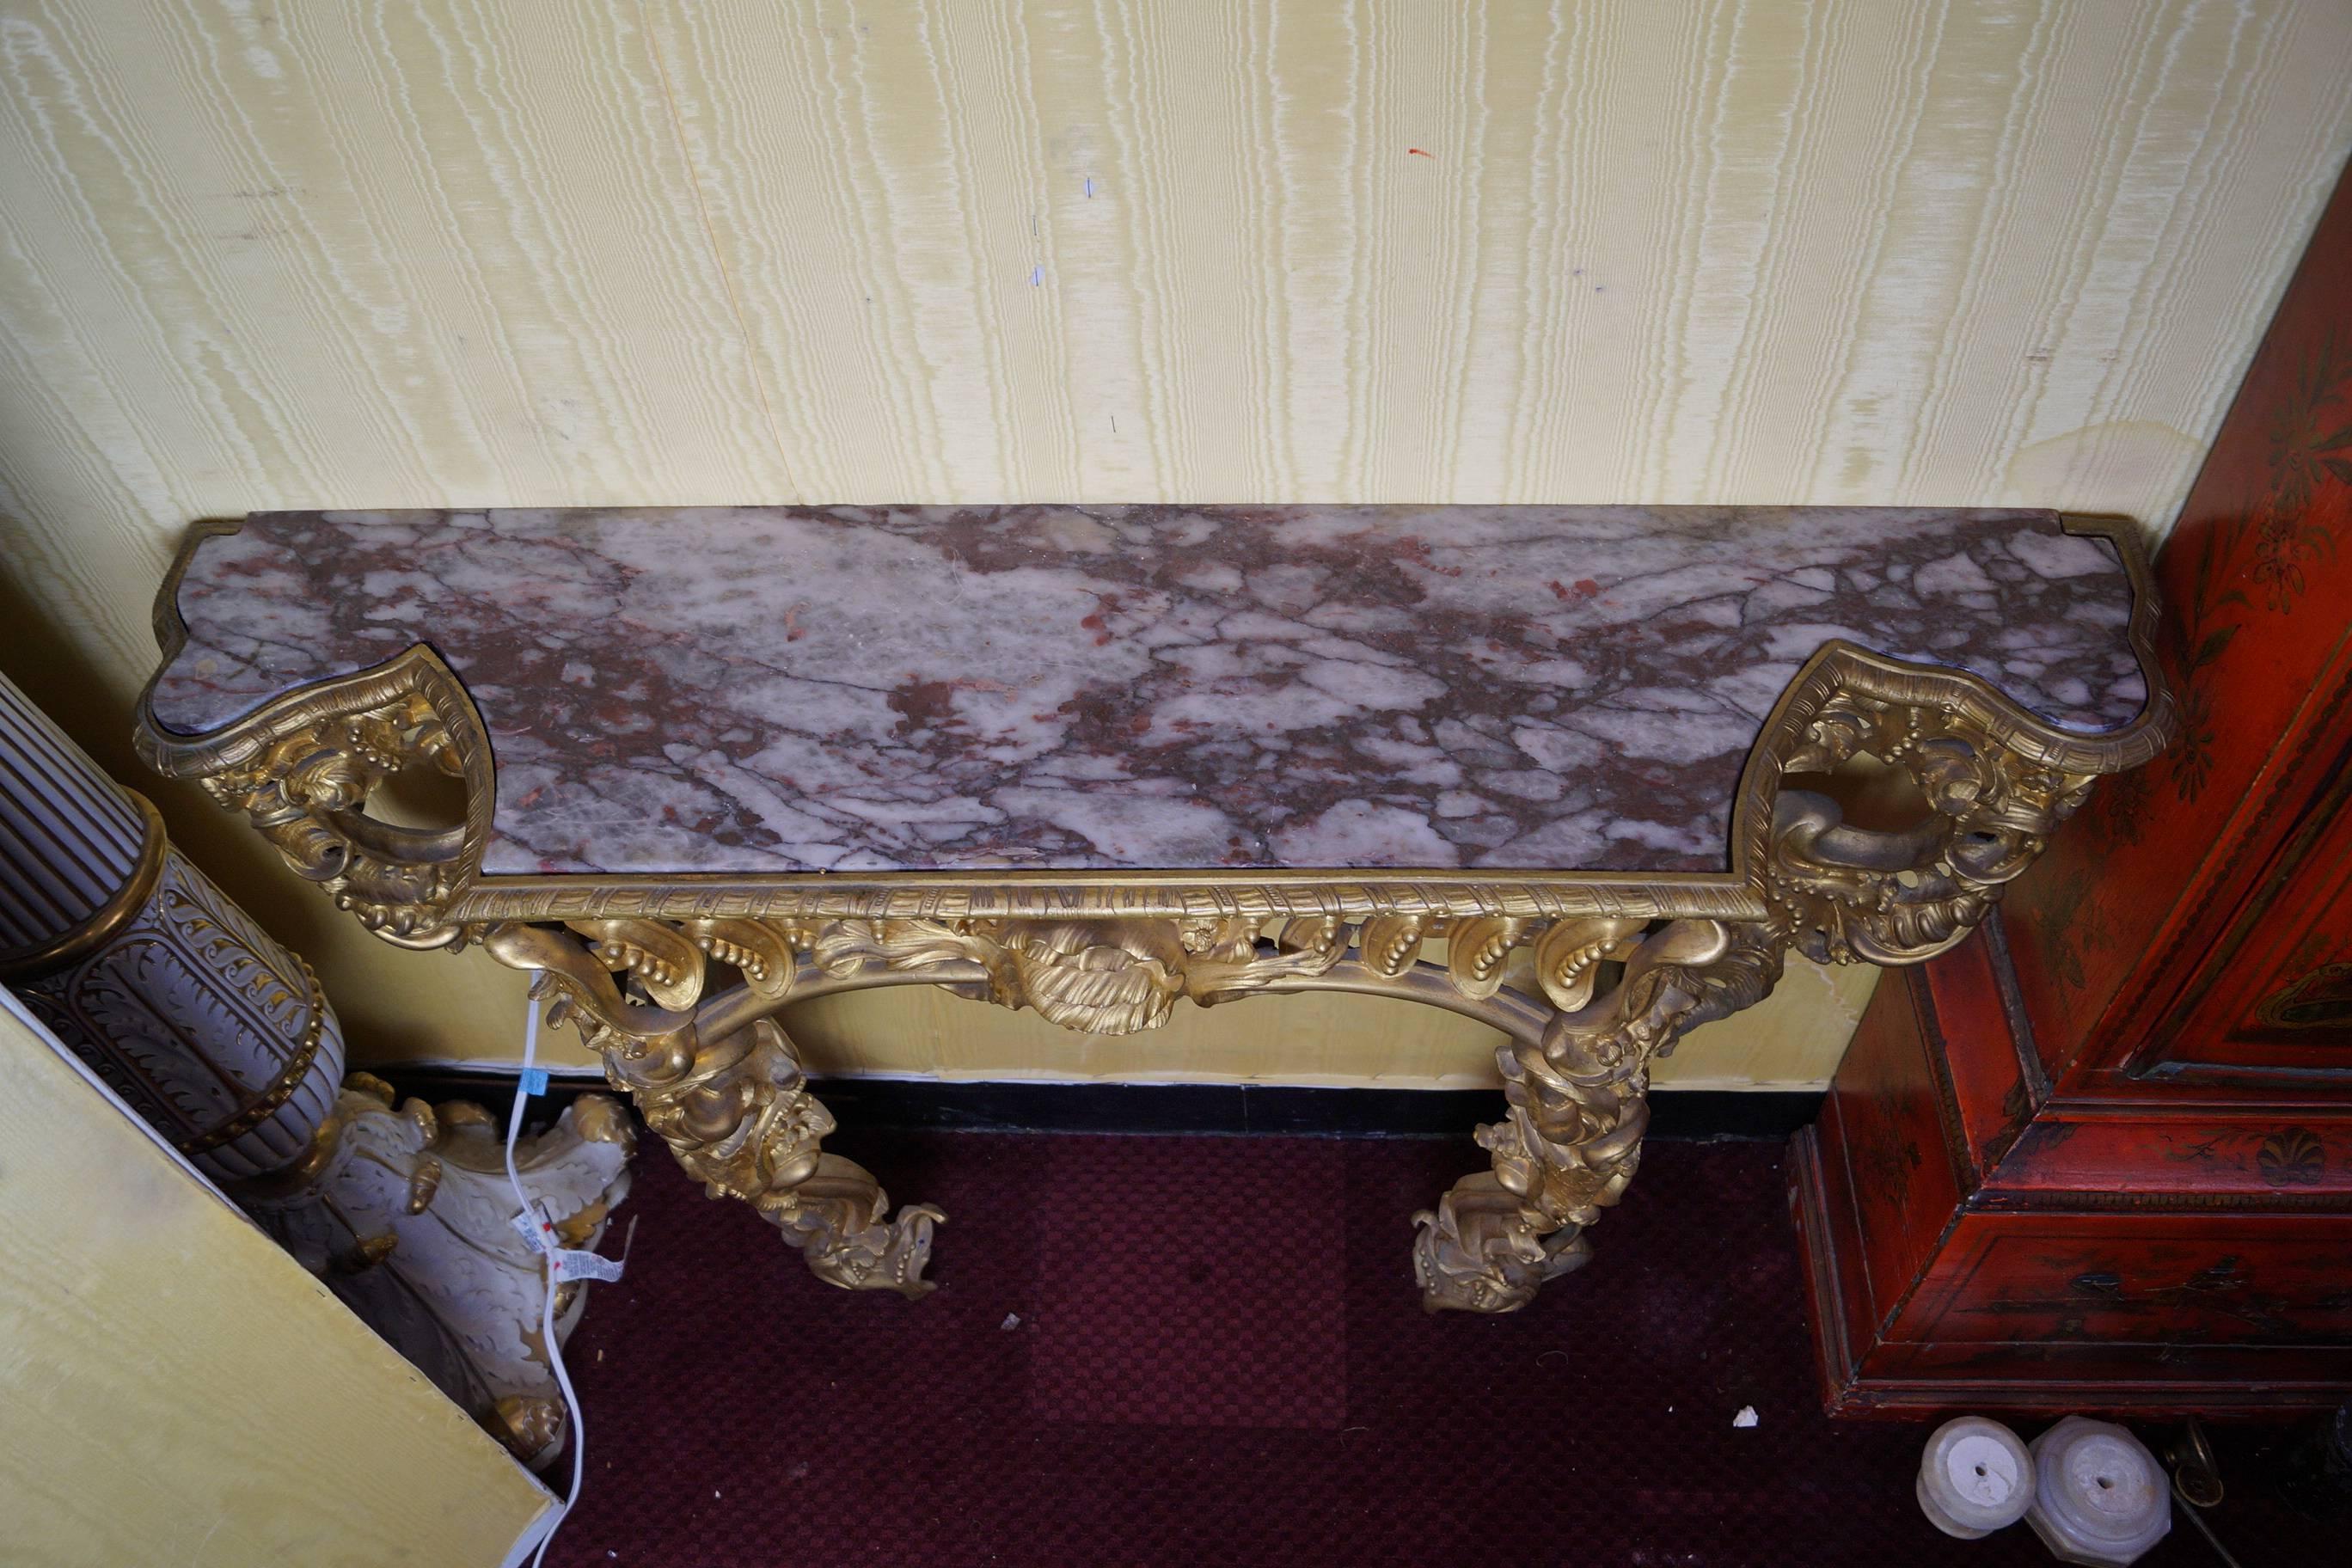 French gilt bronze marble-top console table of very fine casting with great details.
Stock number: F73.